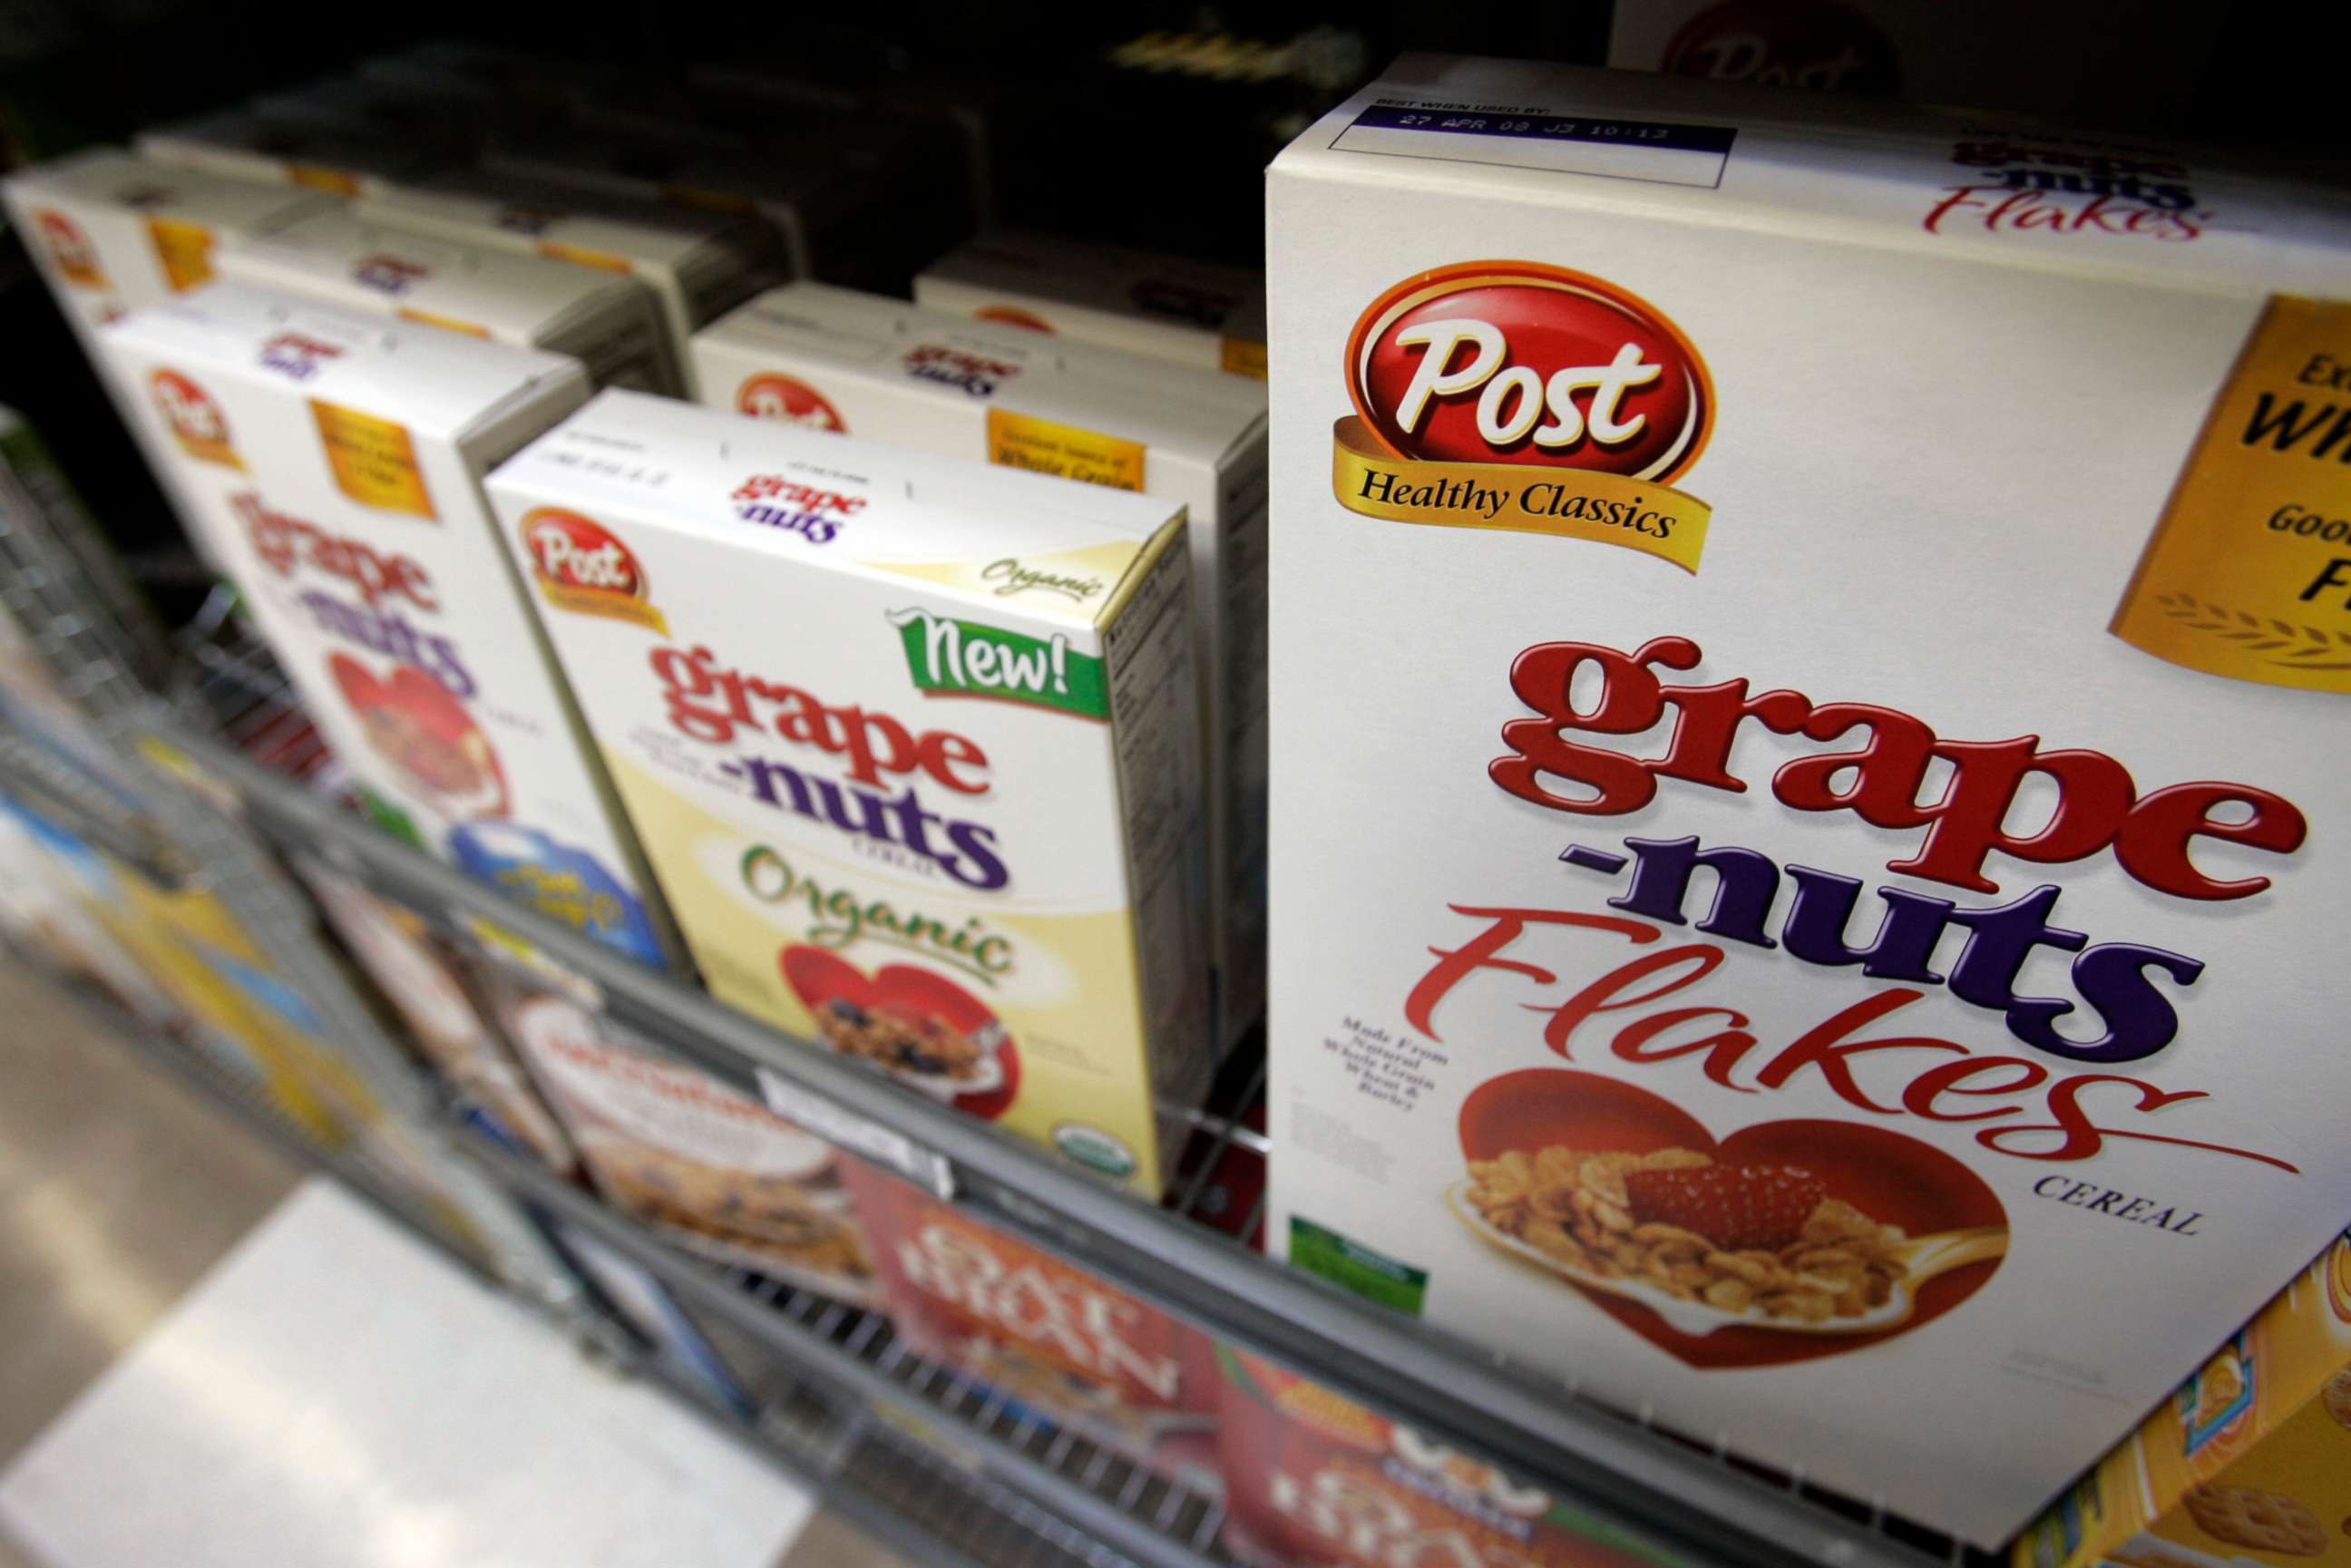 PHOTO: In this Nov. 5, 2007, file photo, Post cereals are seen on display at a grocery store in Palo Alto, Calif.